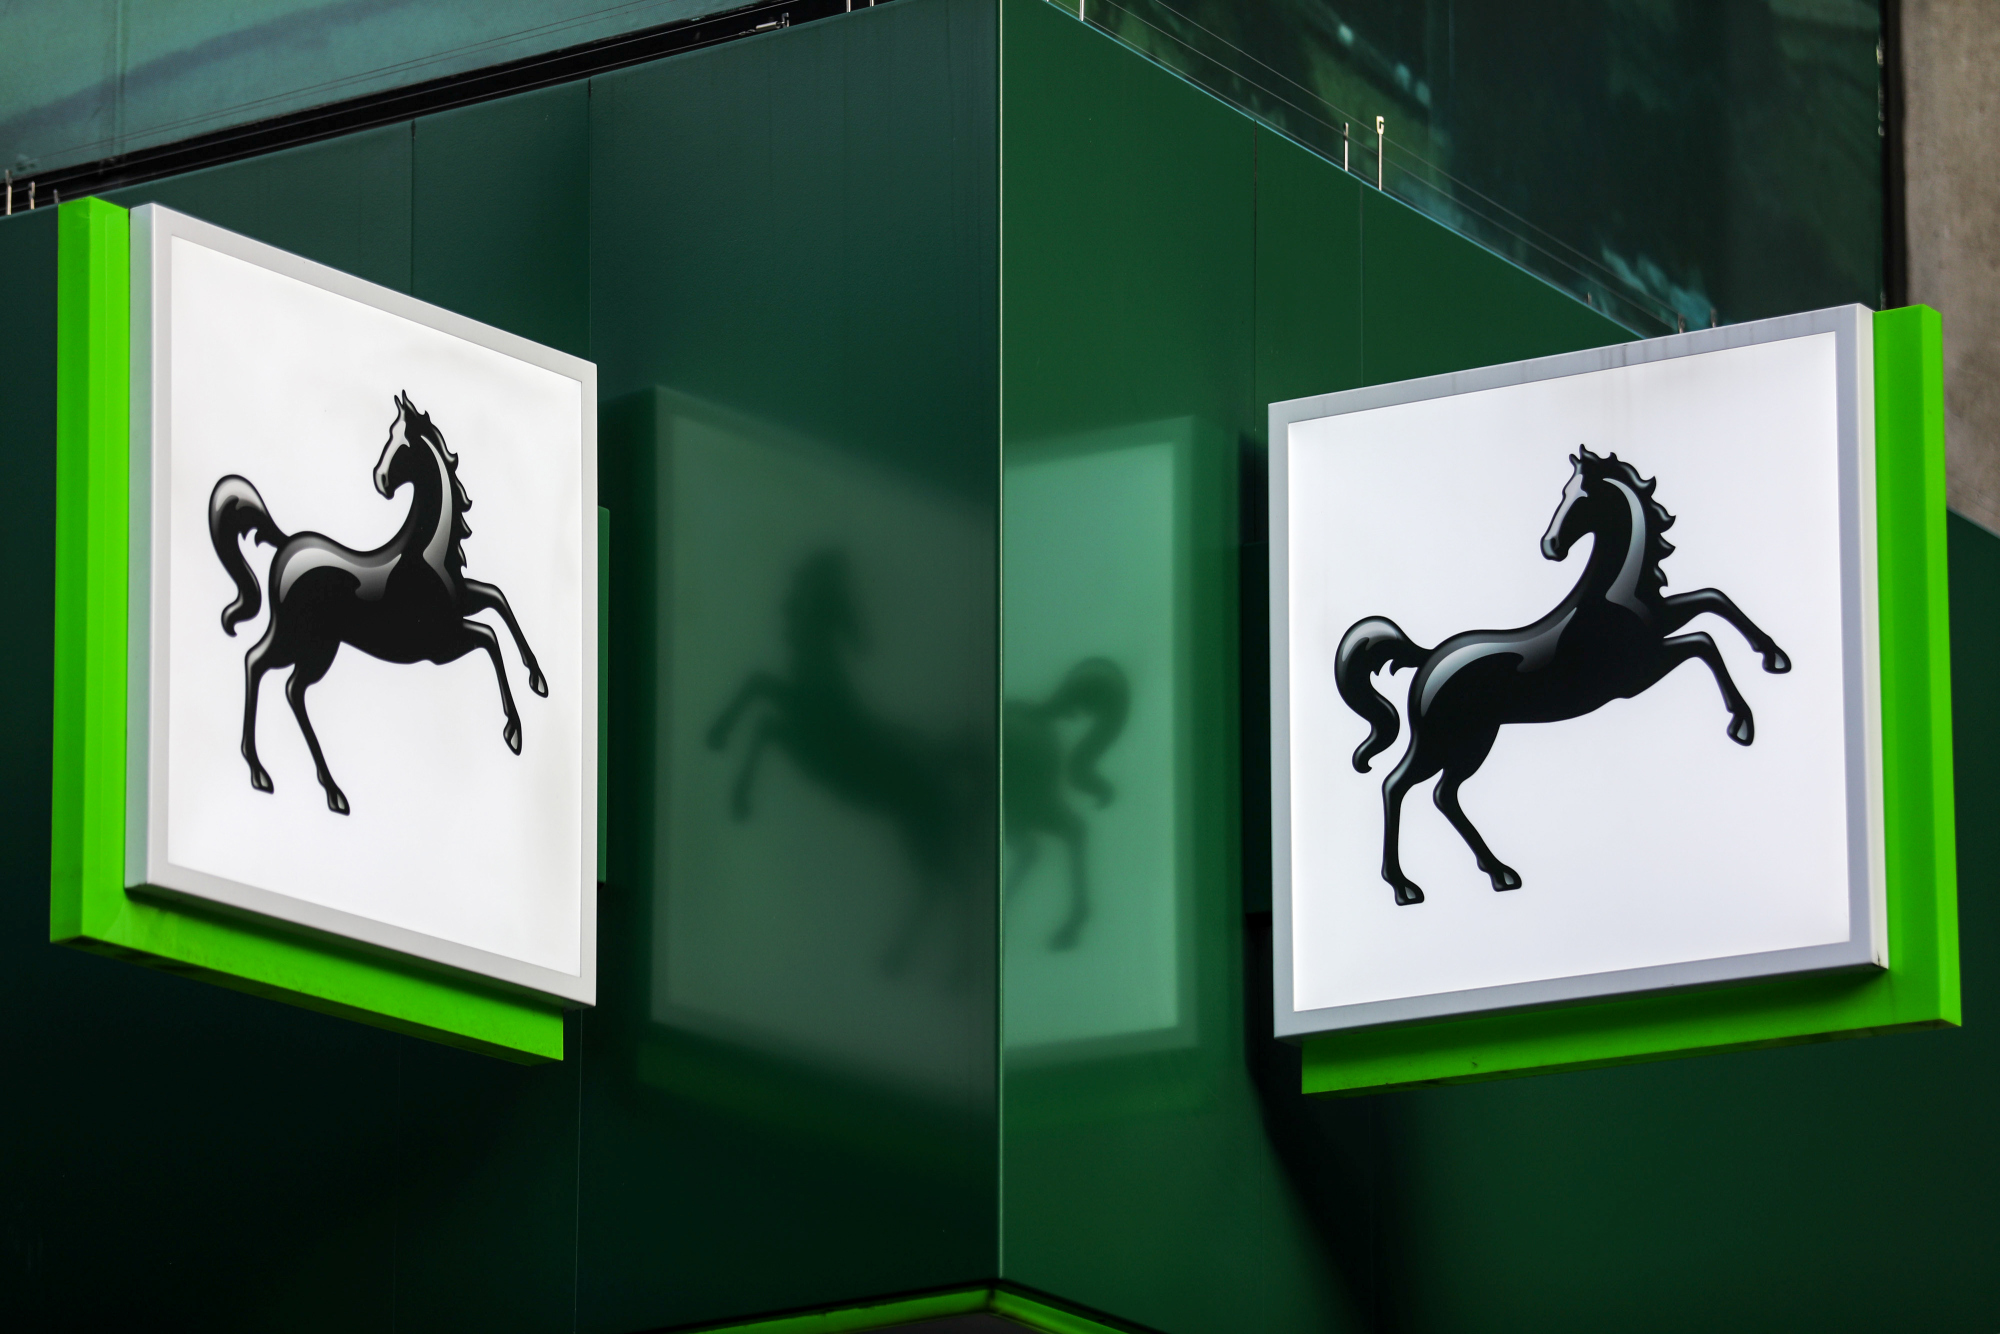 Lloyds Banking Group Plc Headquarters And Branches As Bank Seeks New London Office In $130 Million Cost Push